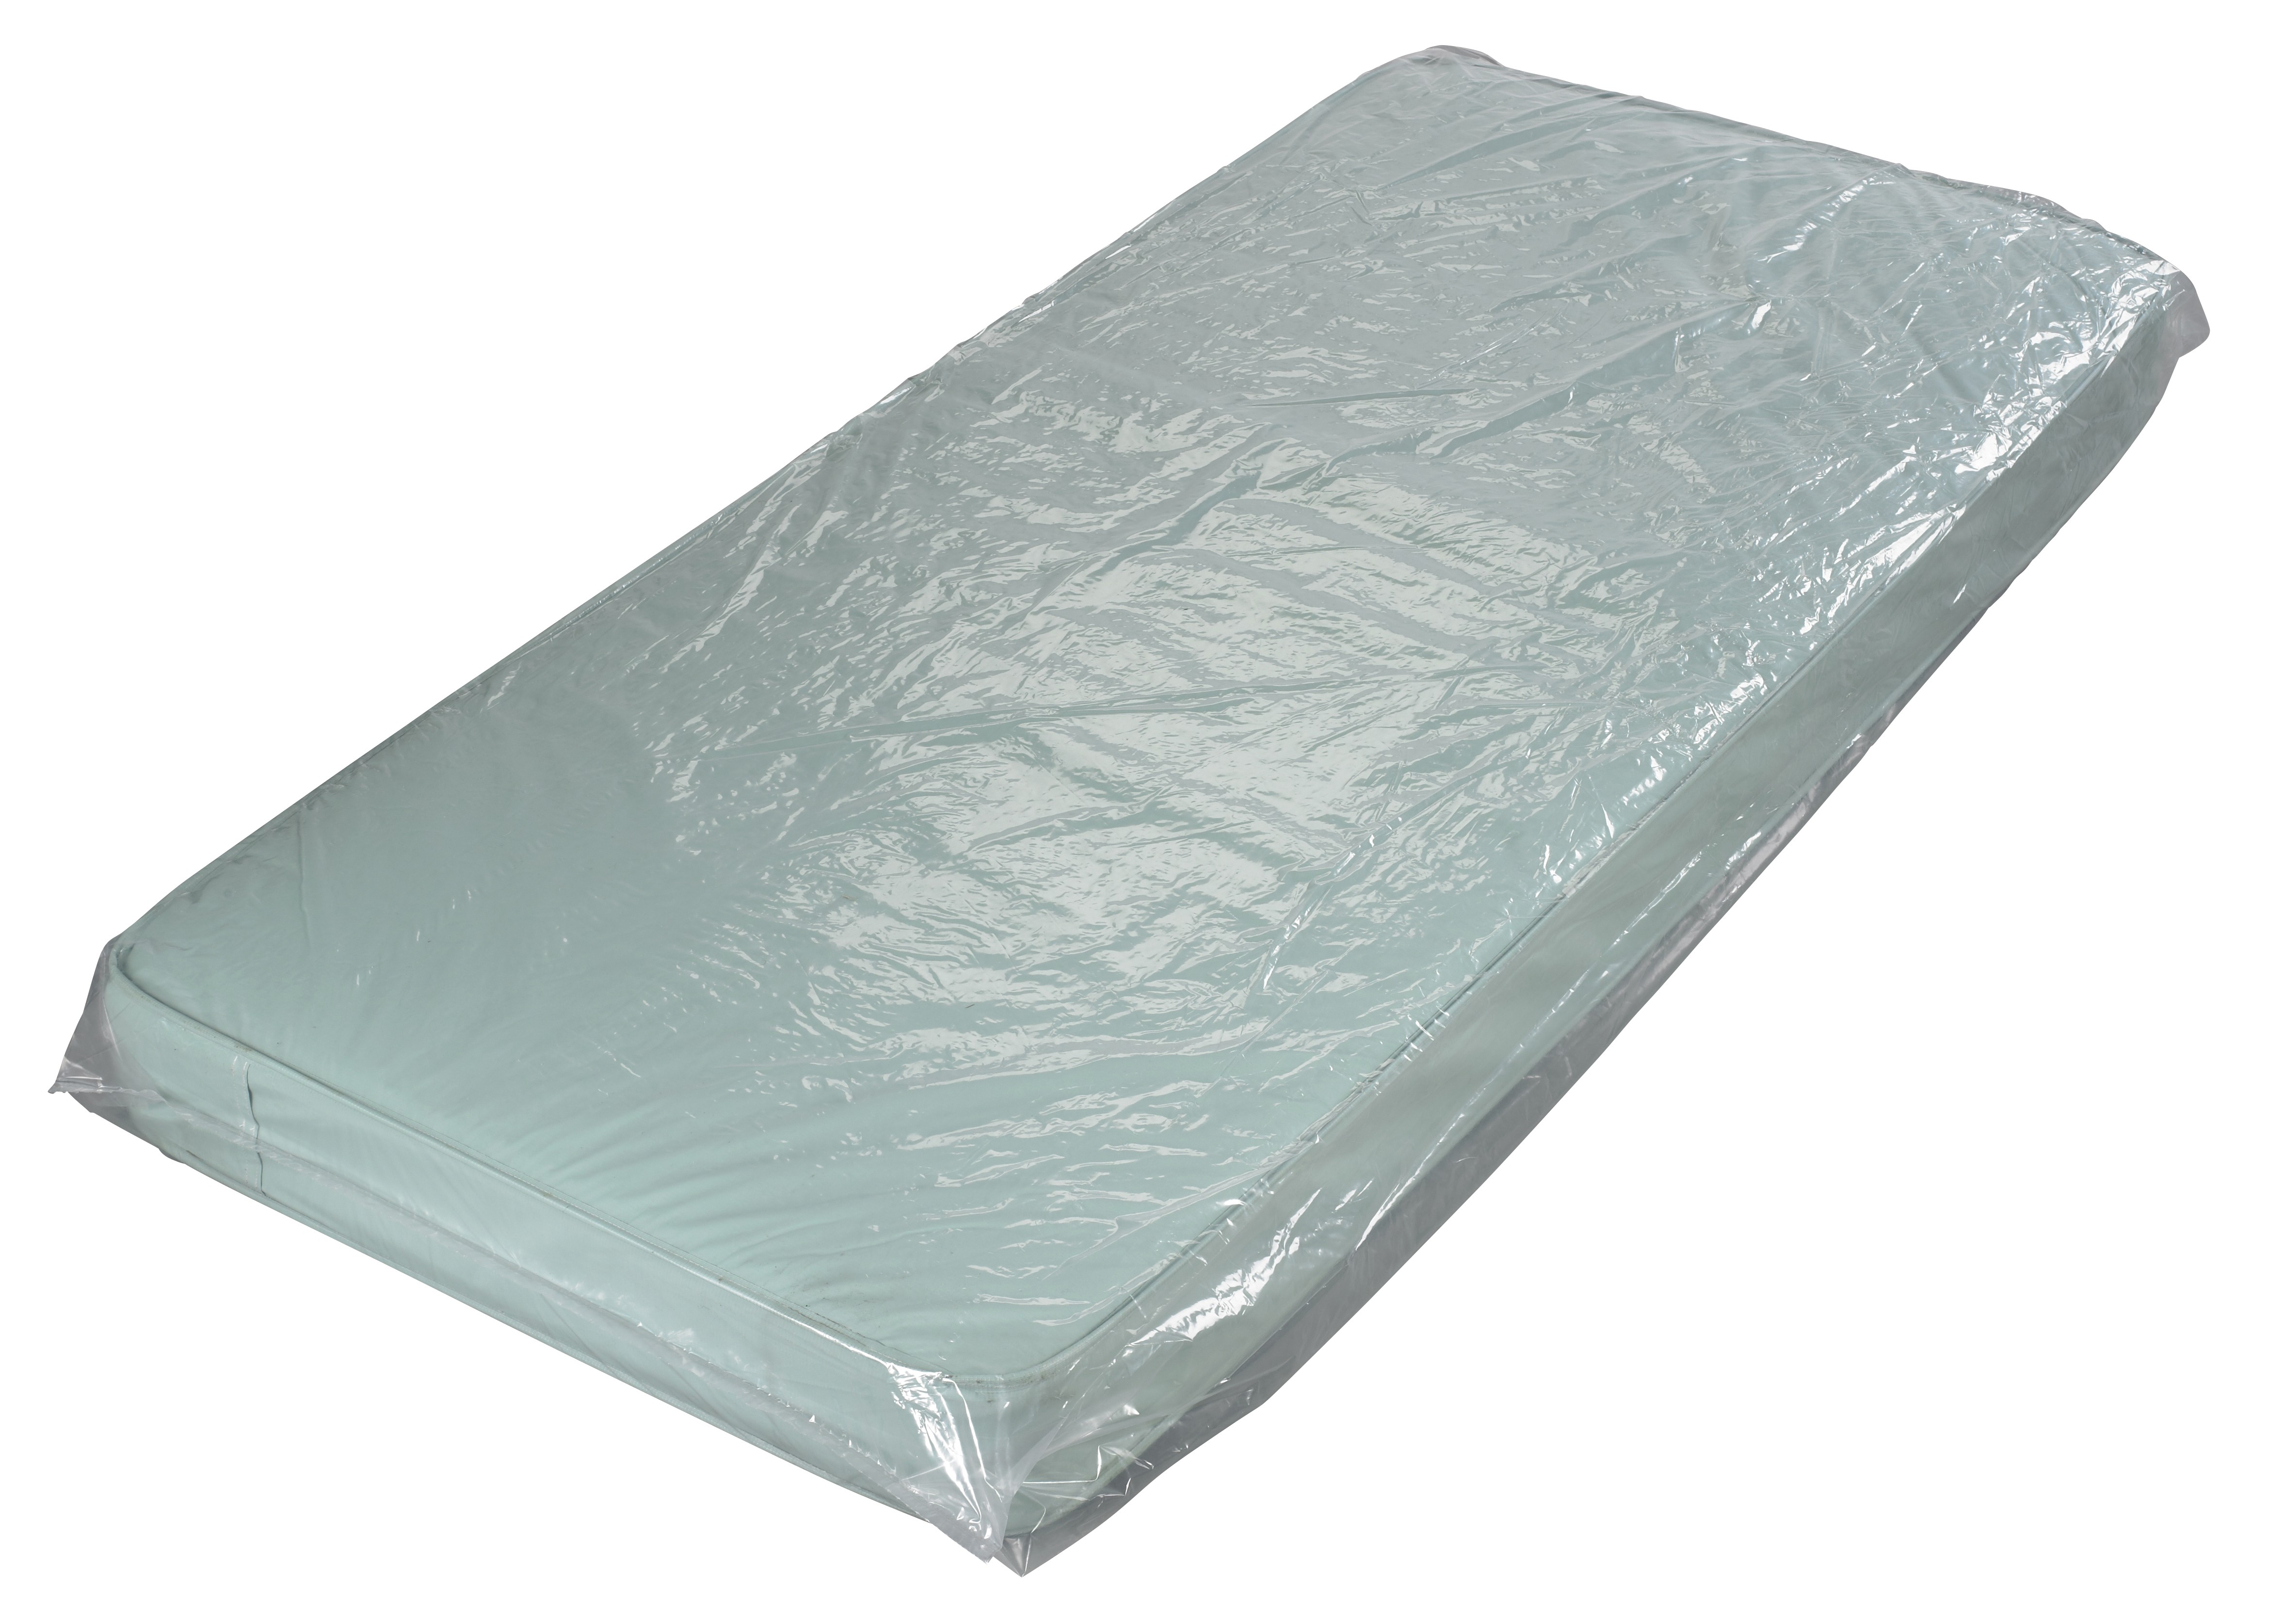 plastic bags to cover mattresses to throw away